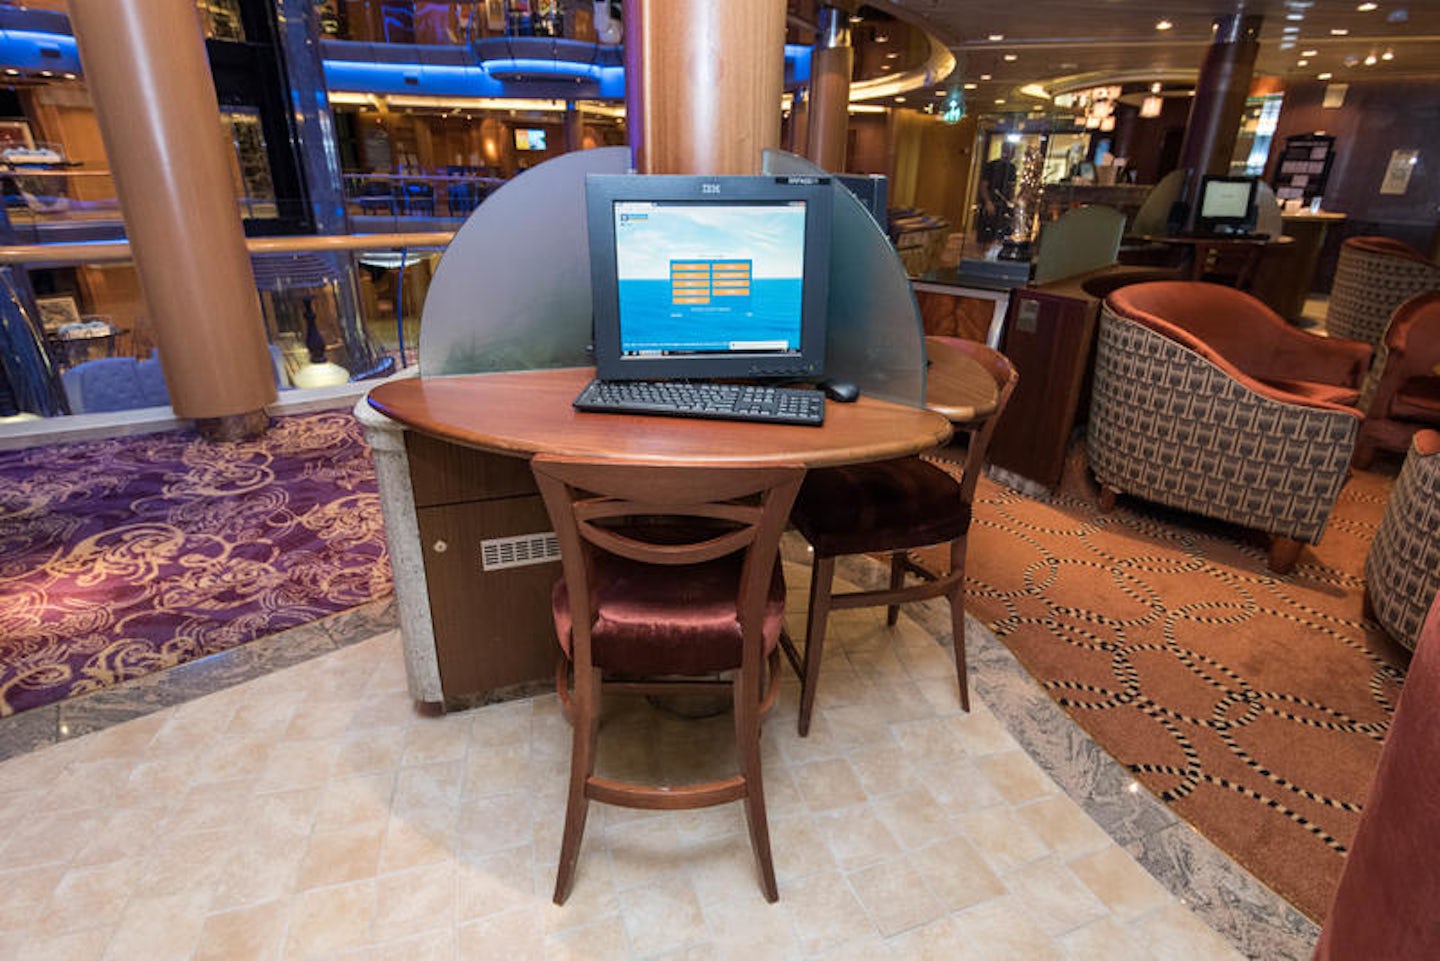 Library on Brilliance of the Seas